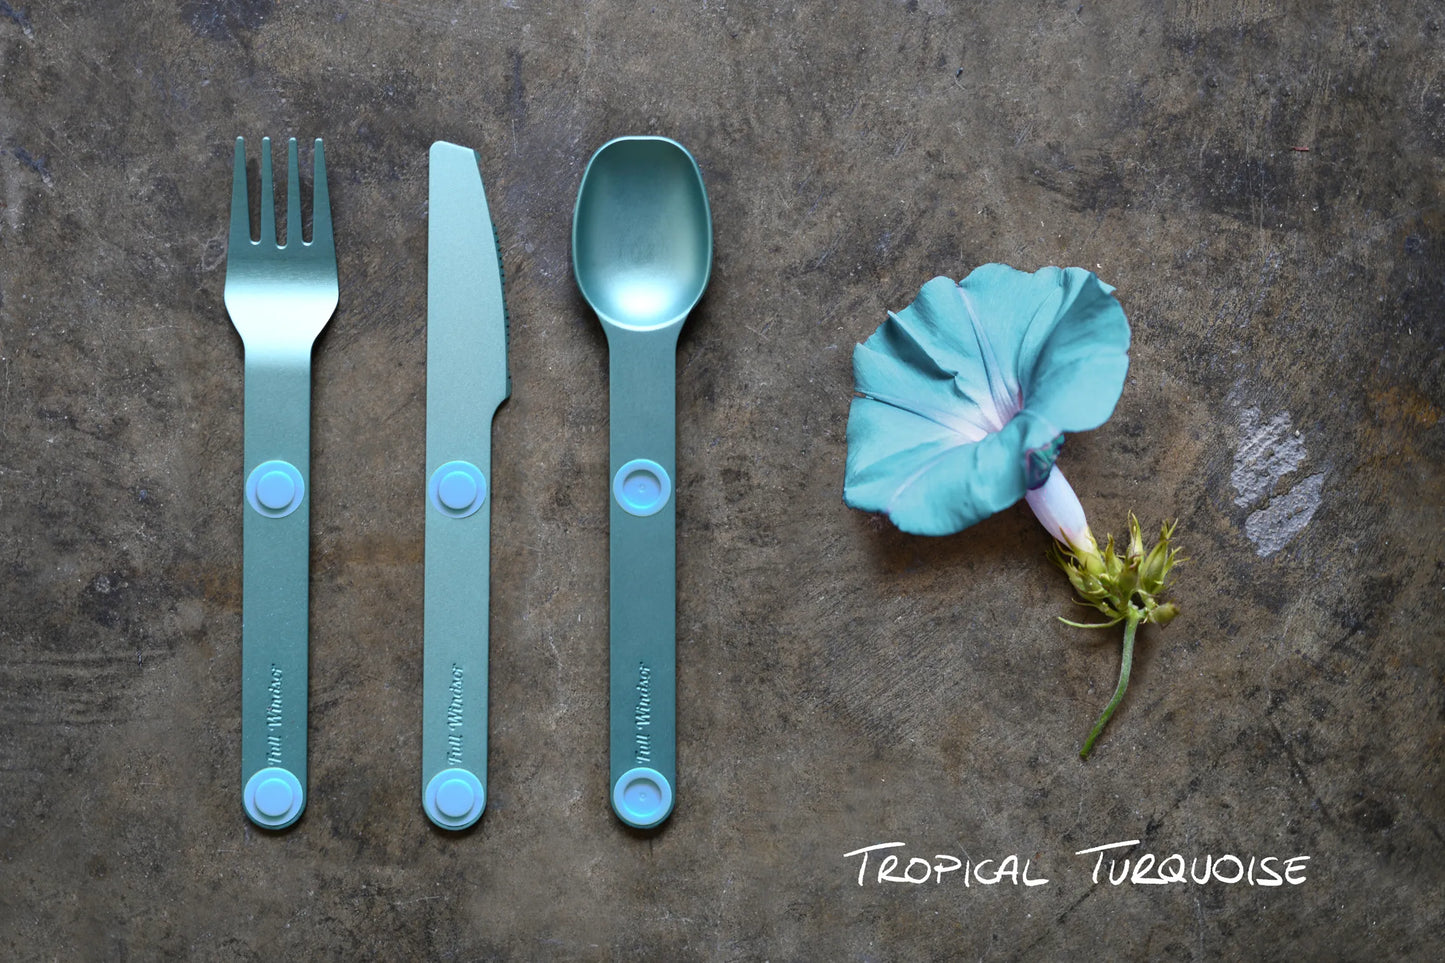 Turquoise fork, knife and spoon next to turquoise flower.